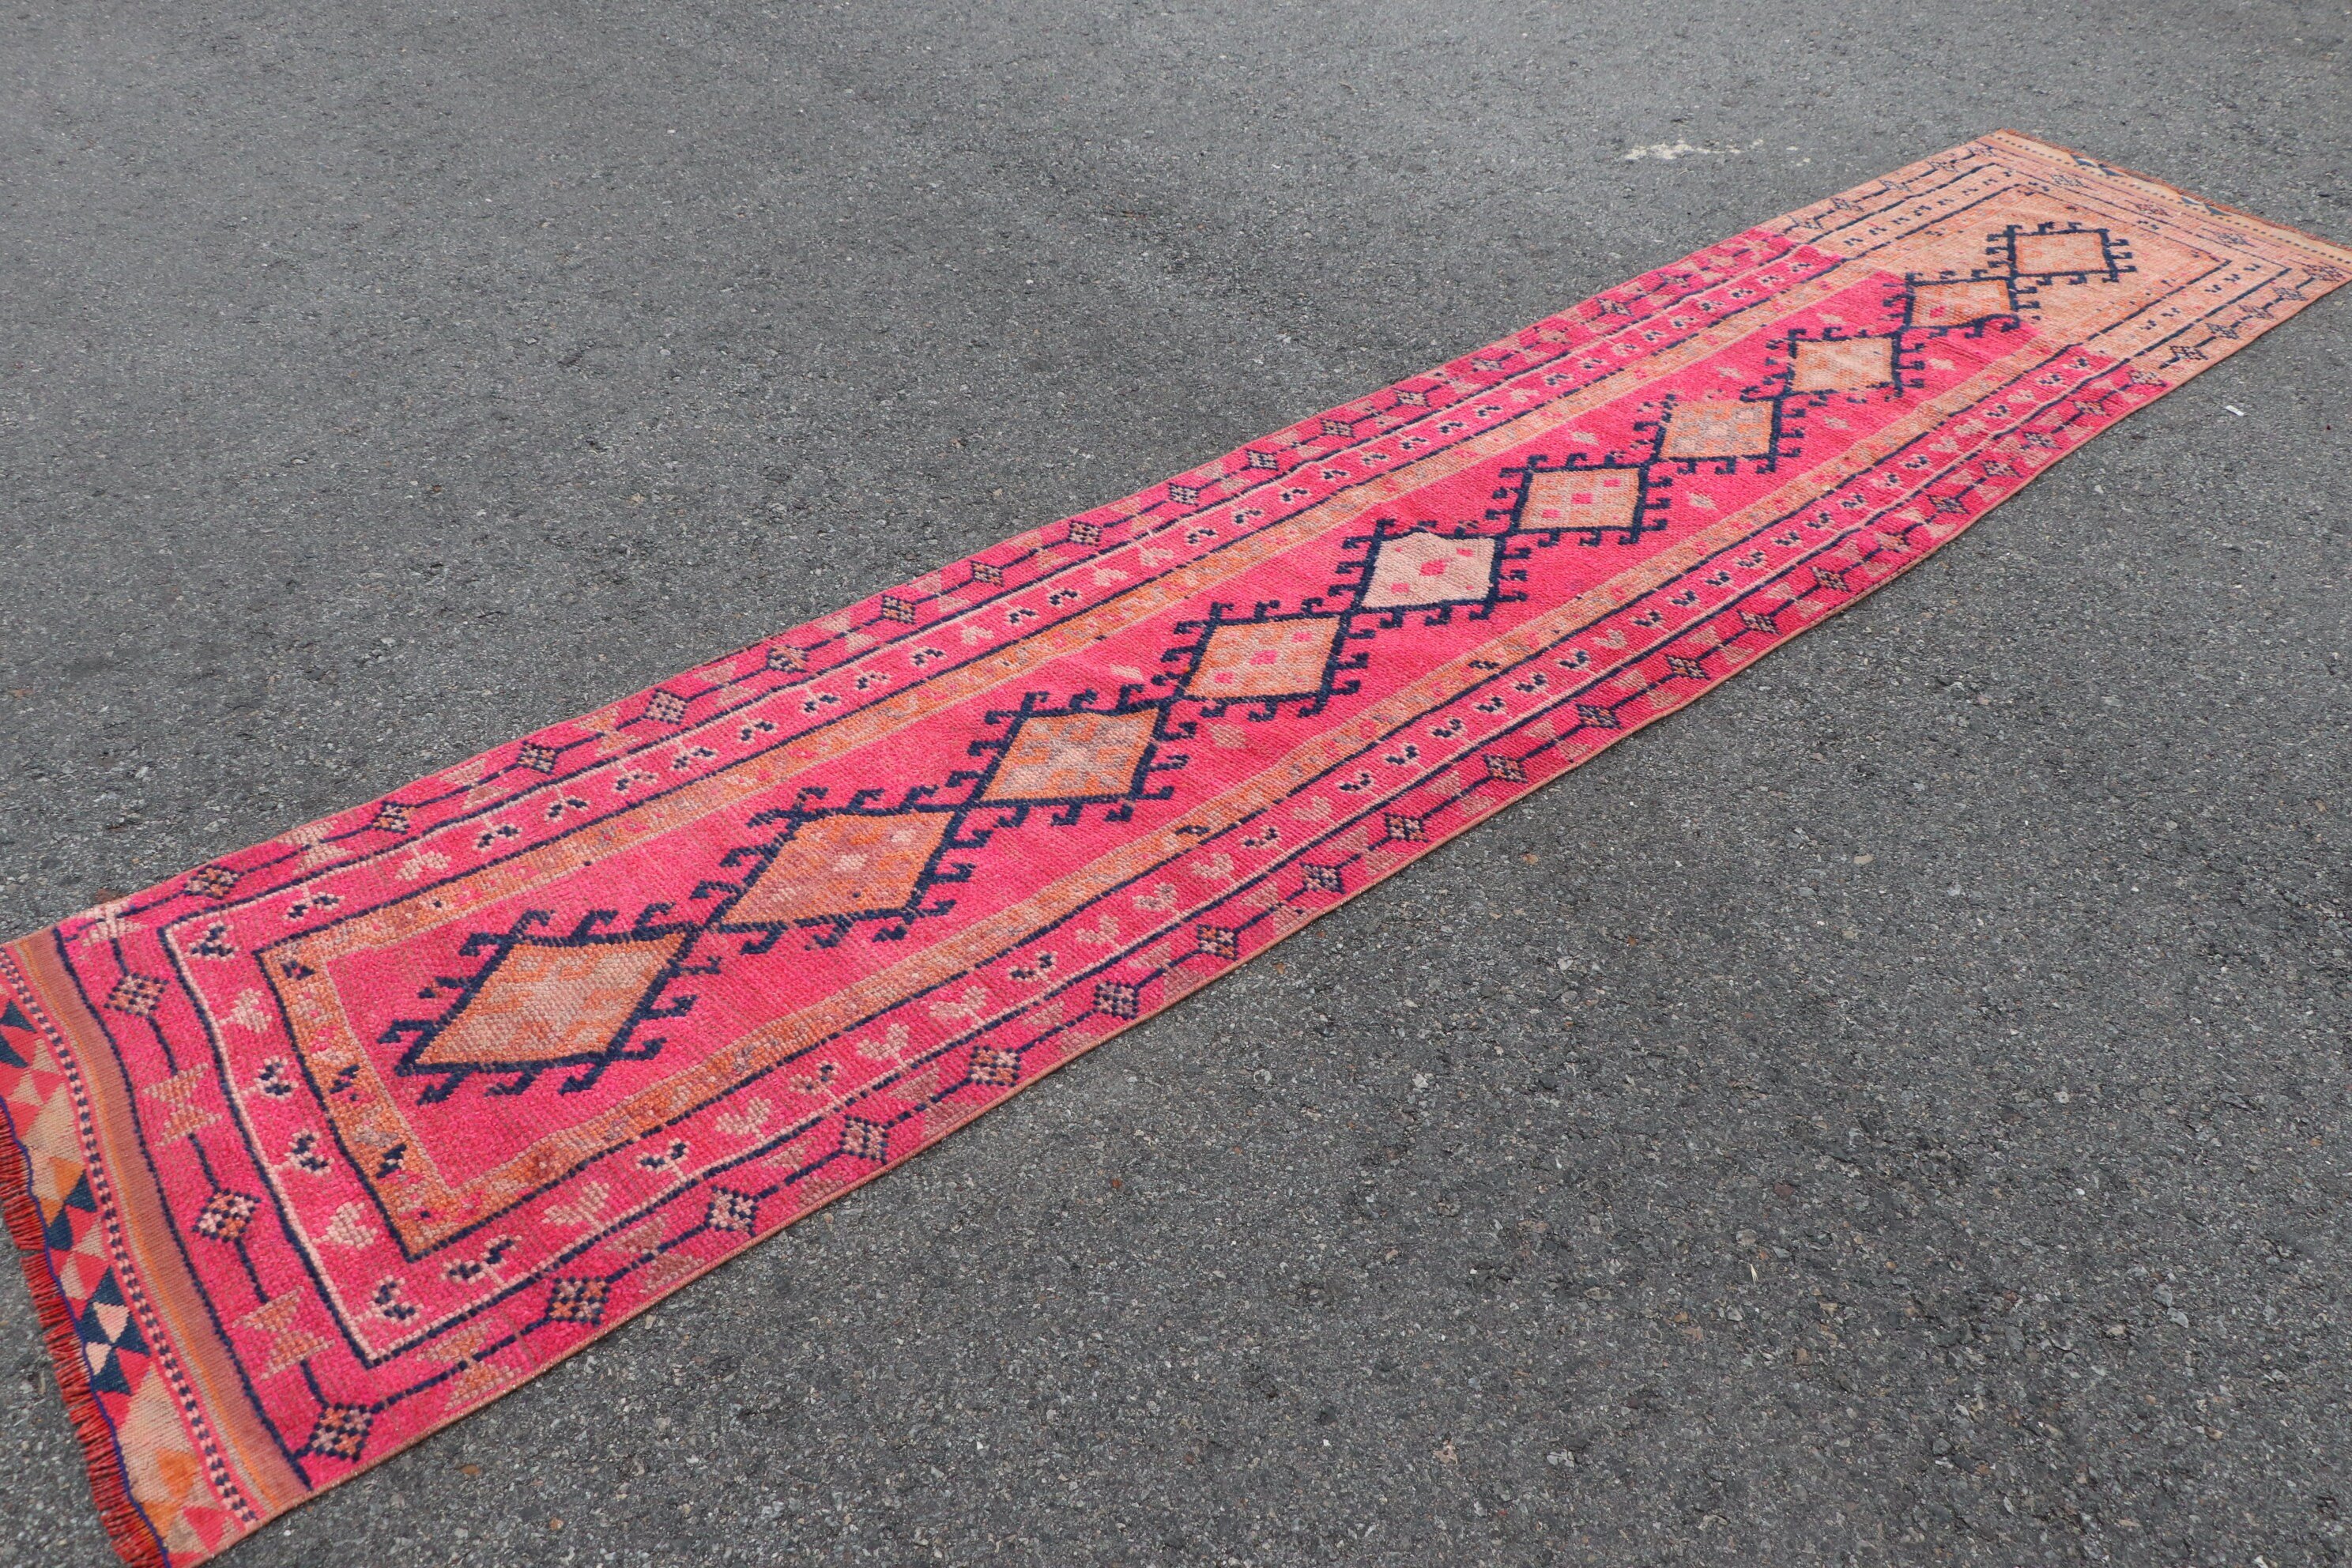 Rugs for Corridor, Kitchen Rug, Cool Rug, 2.7x13 ft Runner Rug, Corridor Rugs, Vintage Rugs, Tribal Rugs, Turkish Rug, Pink Cool Rugs